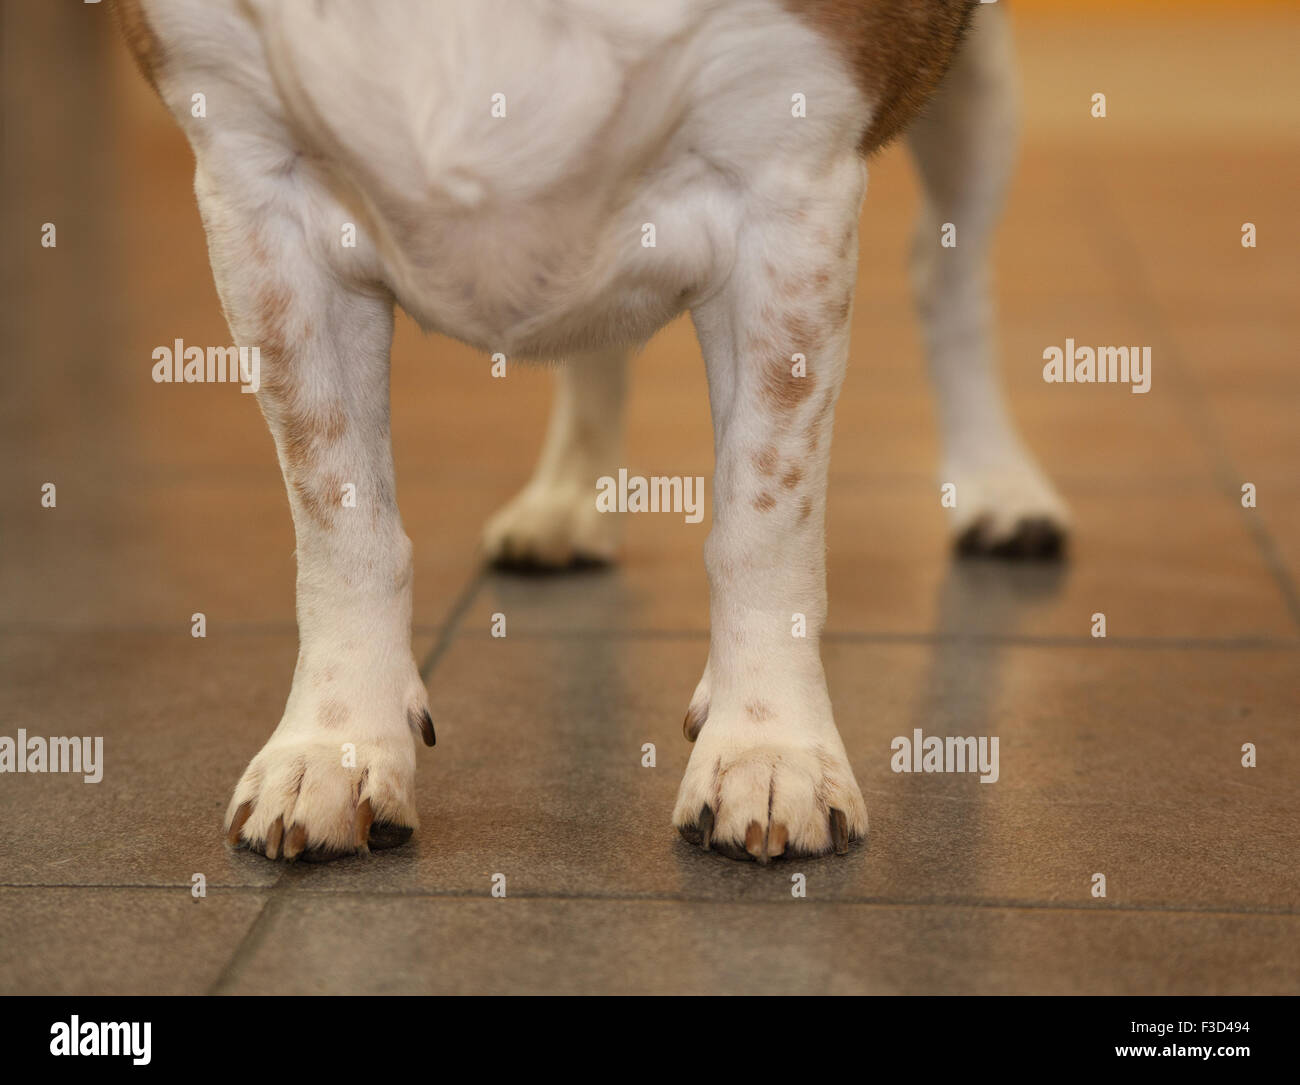 senior beagle dog shows only his 4 white legs and paws on a tiled floor Stock Photo